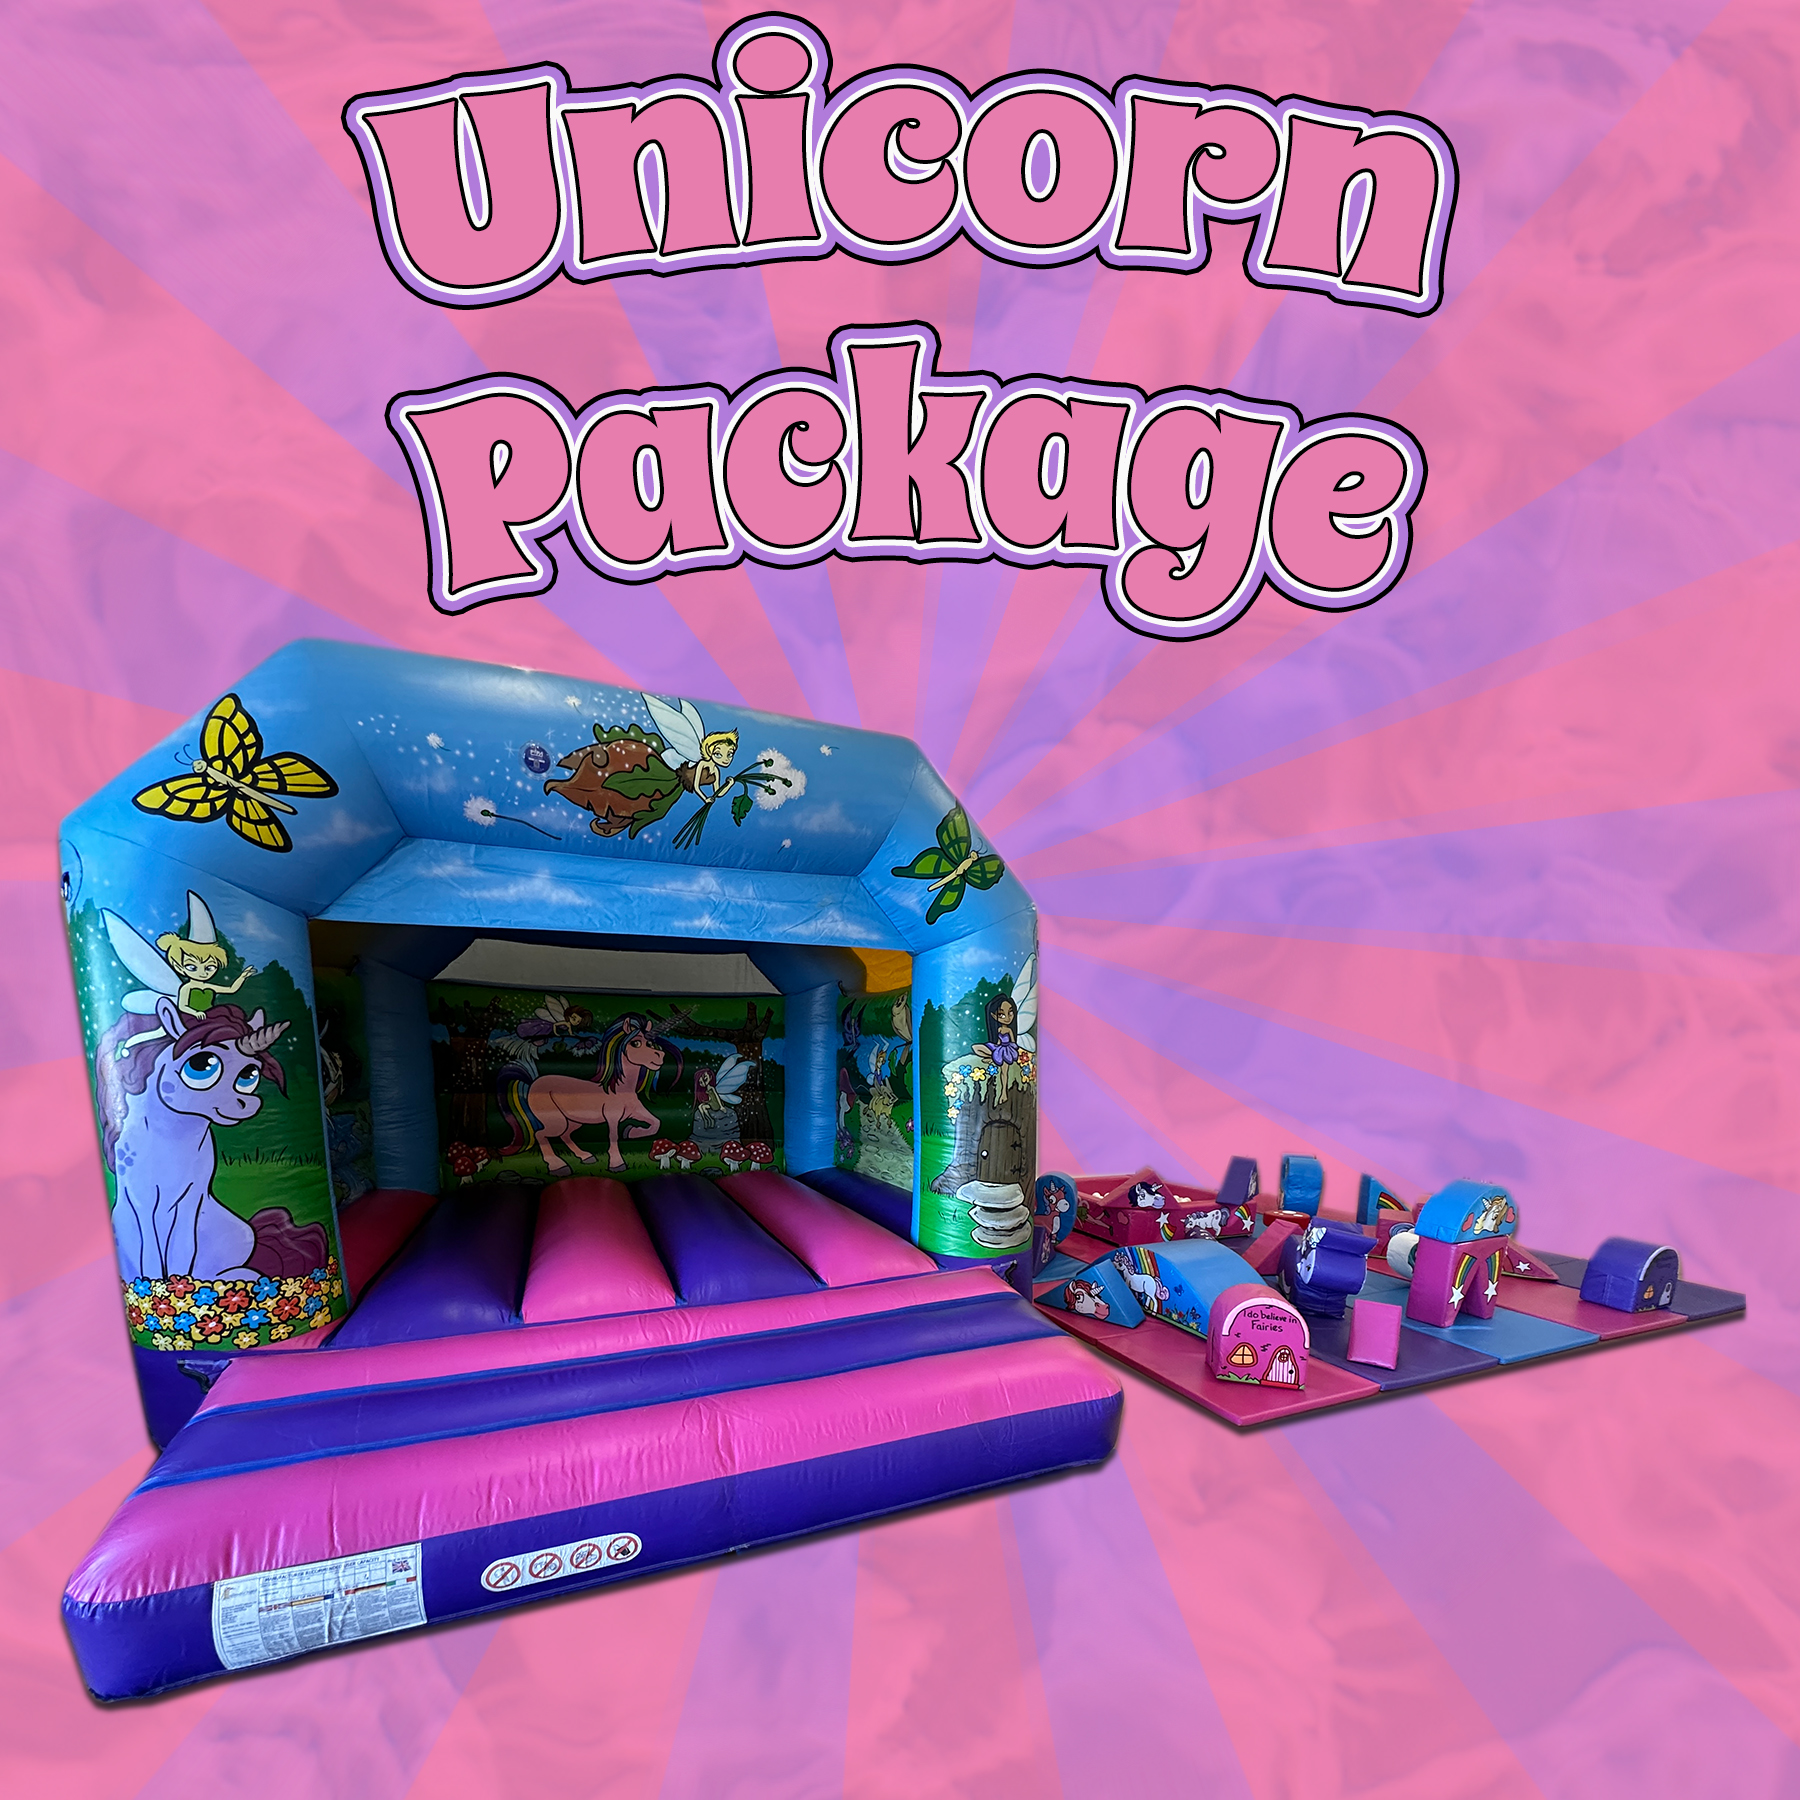 Unicorn bouncy castle and softplay package